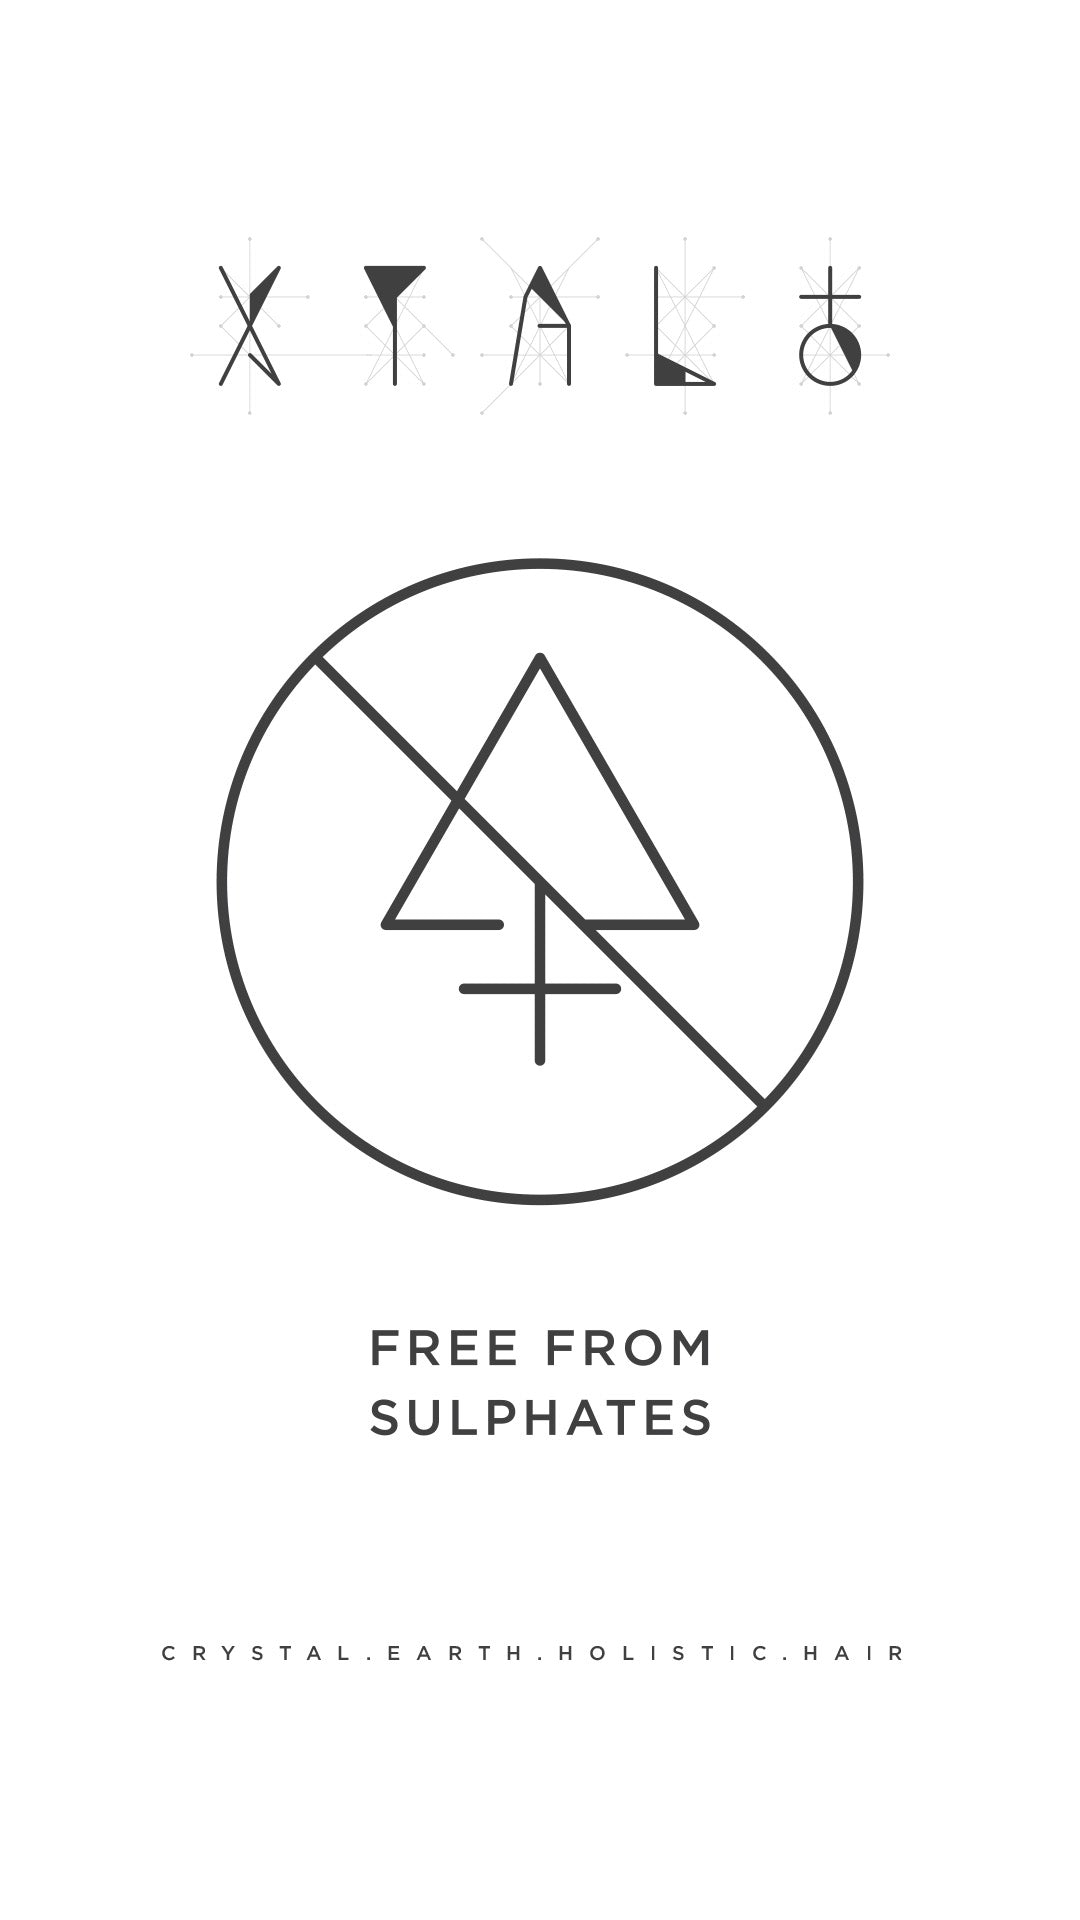 Why sulphates are bad for your hair + the environment